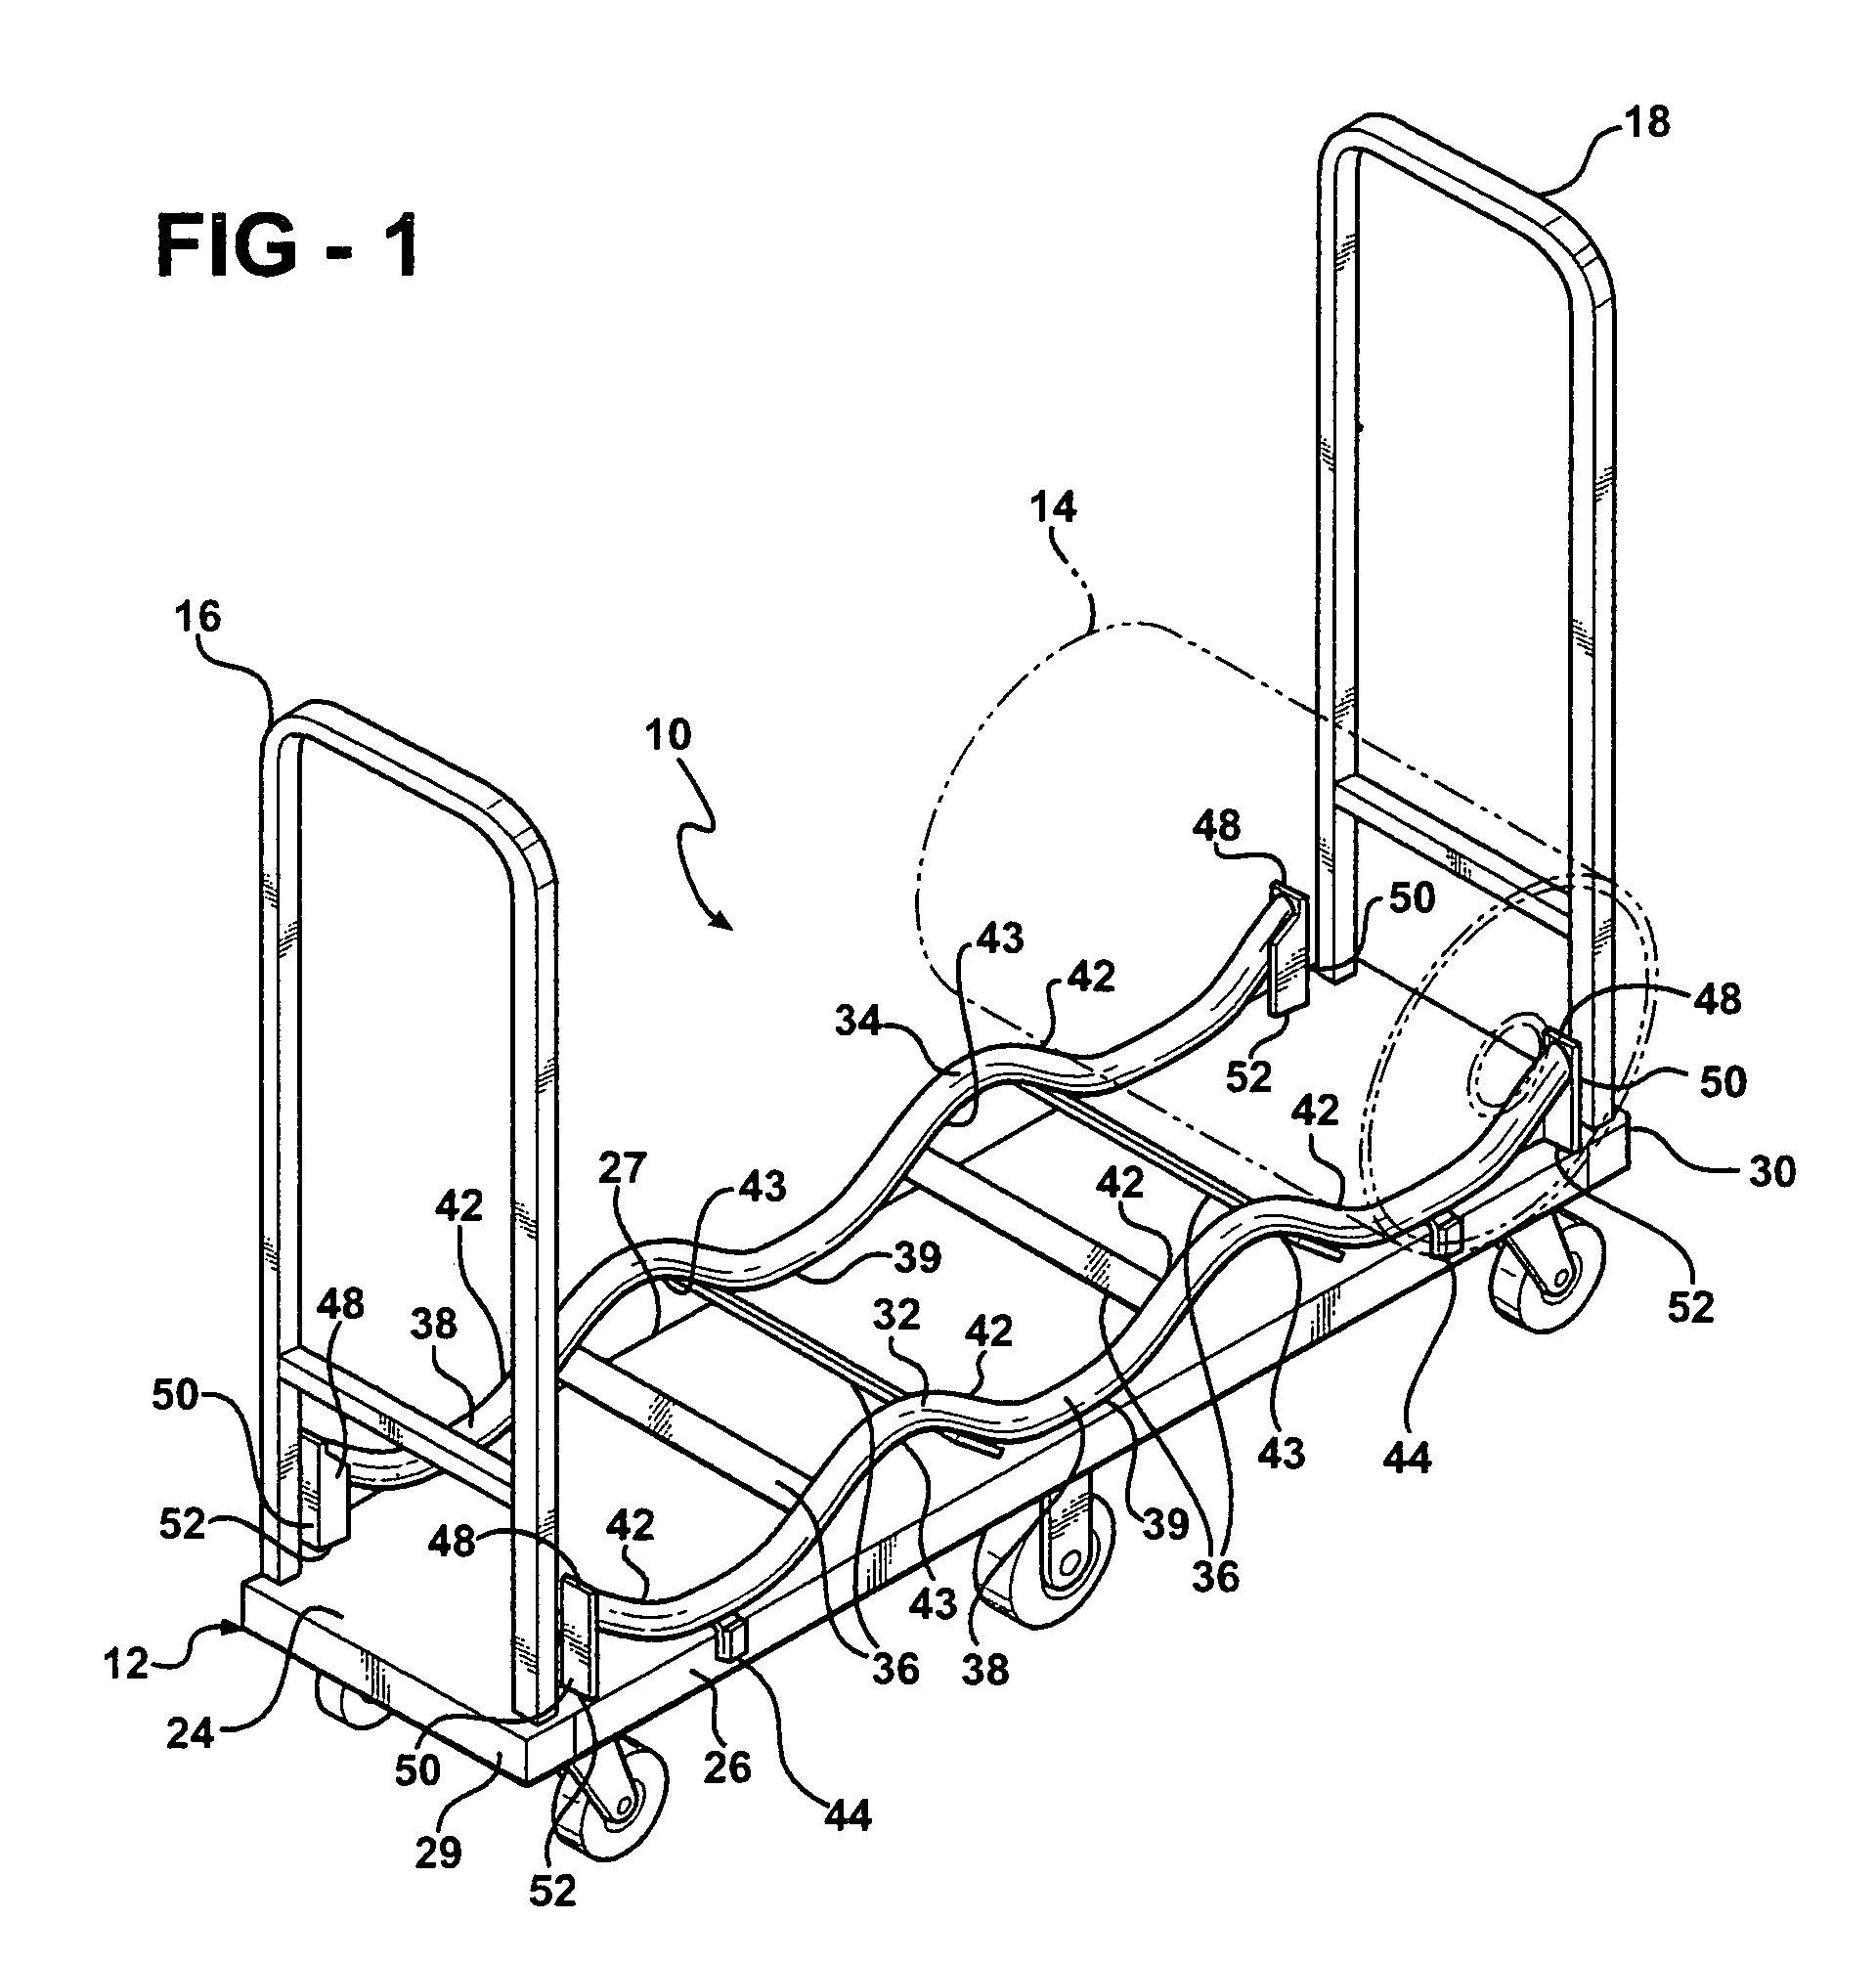 Cargo cart system incorporating a portable container cradle